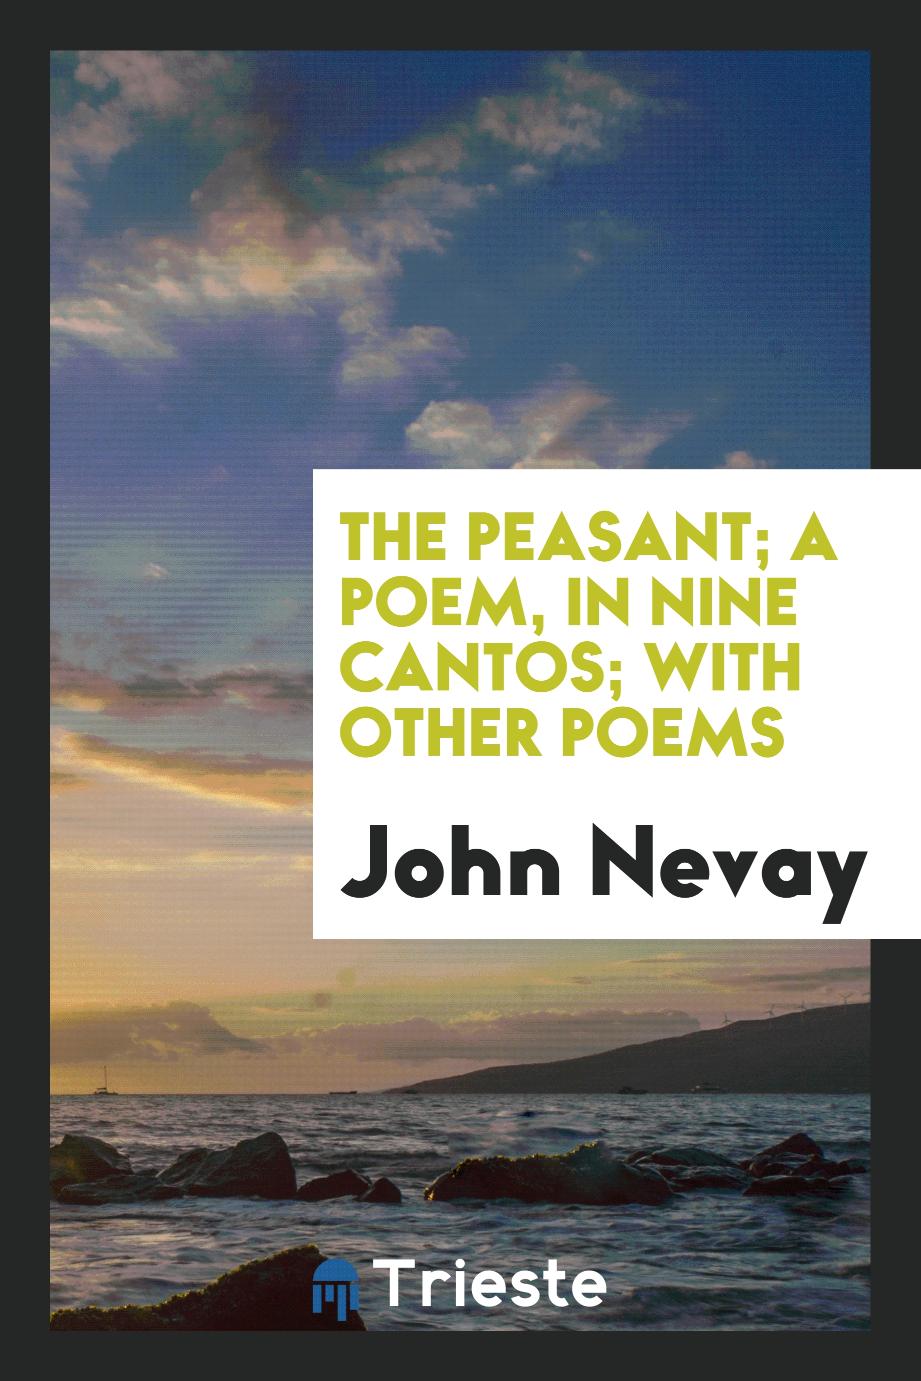 The peasant; a poem, in nine cantos; with other poems